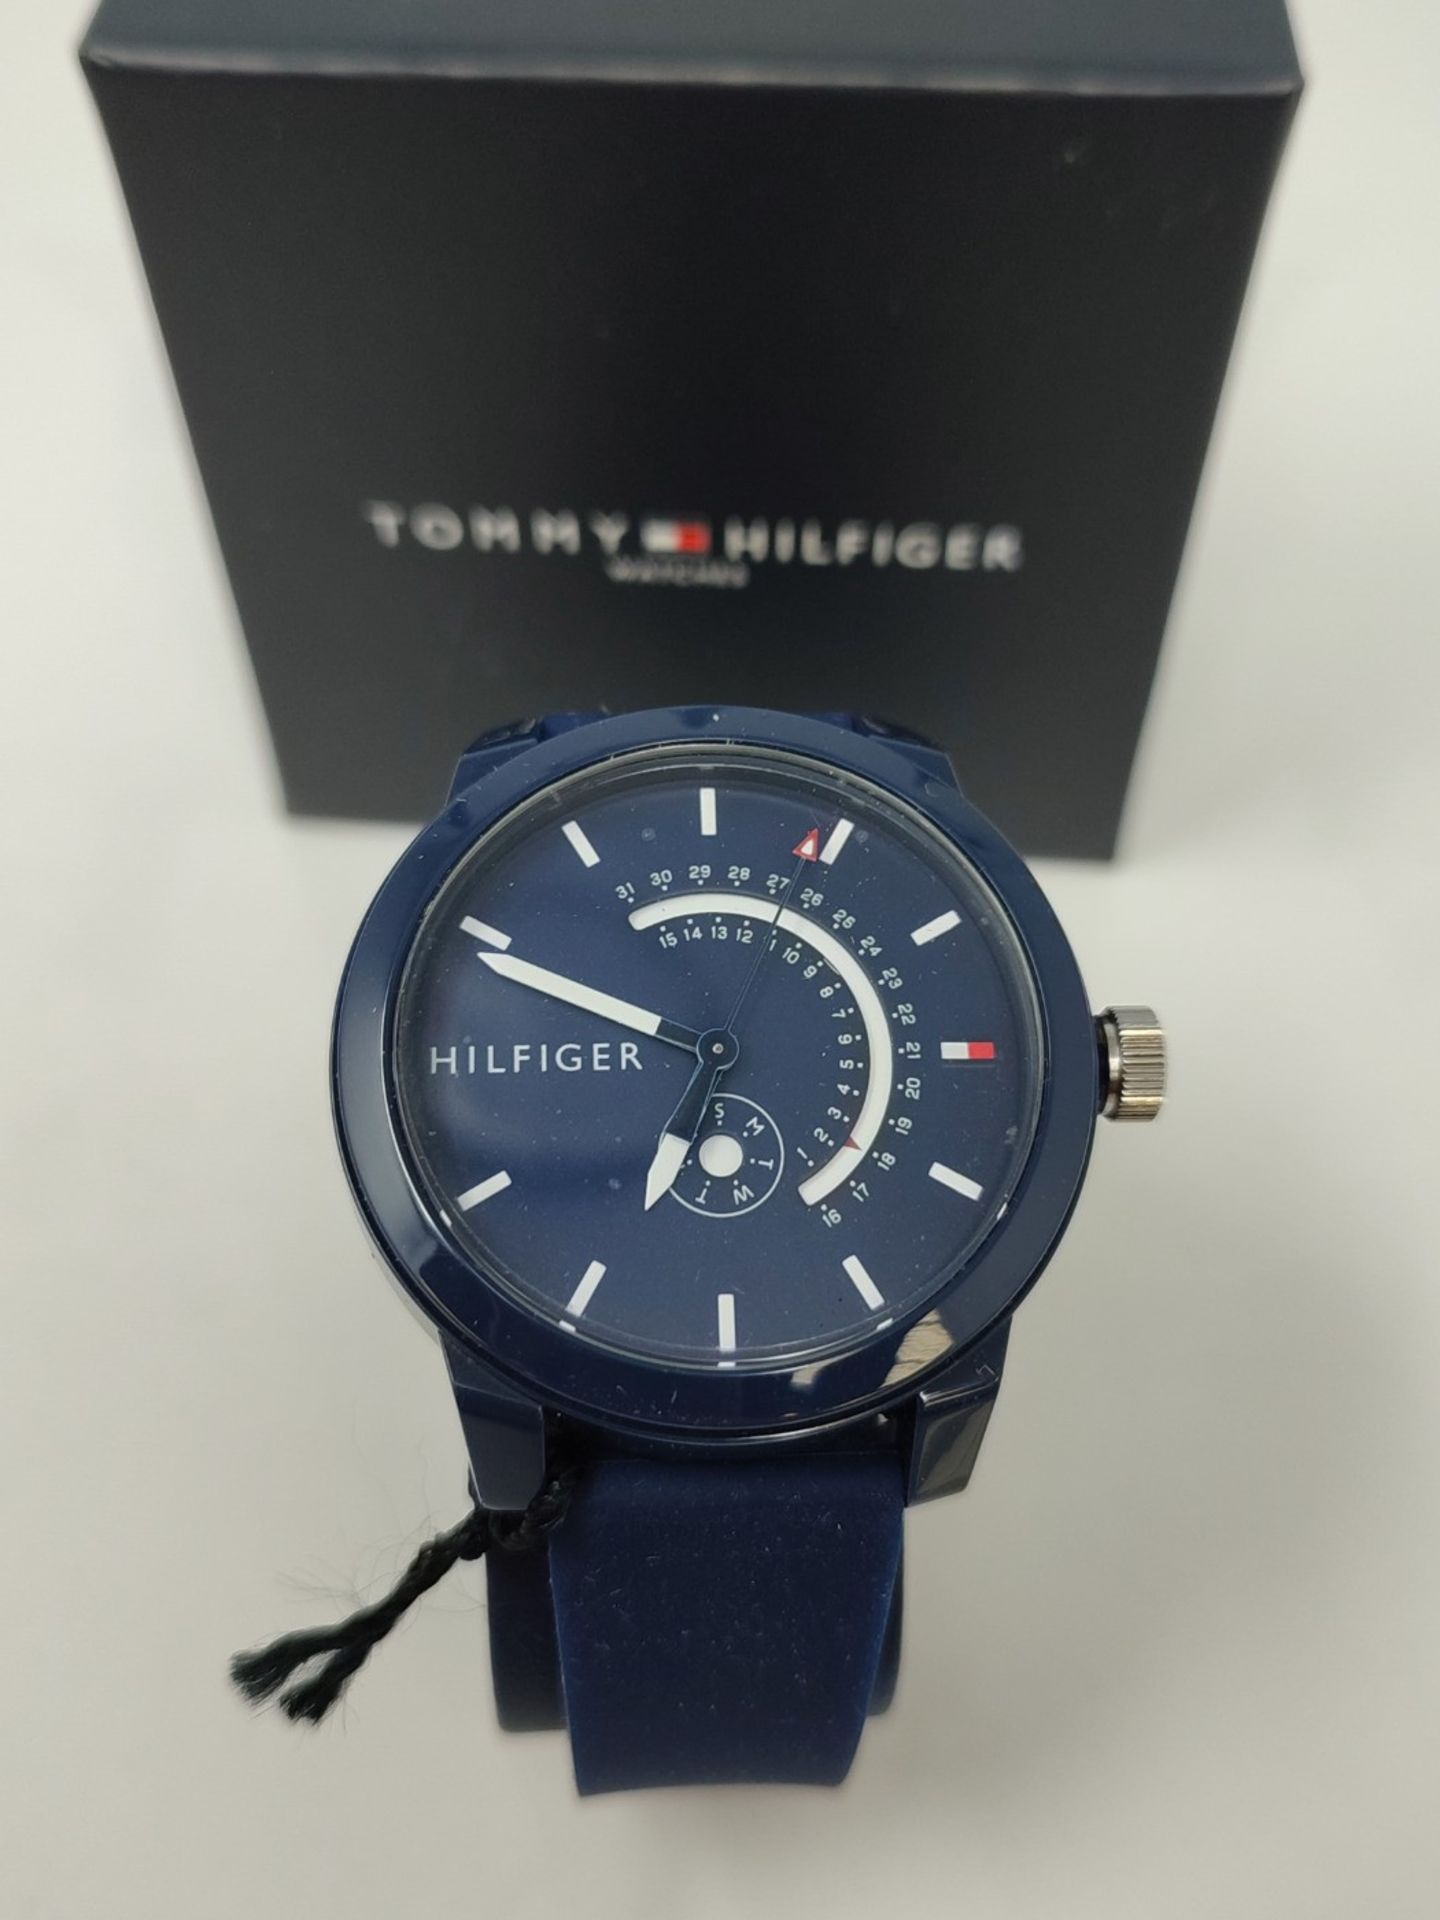 RRP £98.00 Tommy Hilfiger Men's Analog Quartz Watch with Blue Silicone Strap - 1791482 - Image 2 of 3